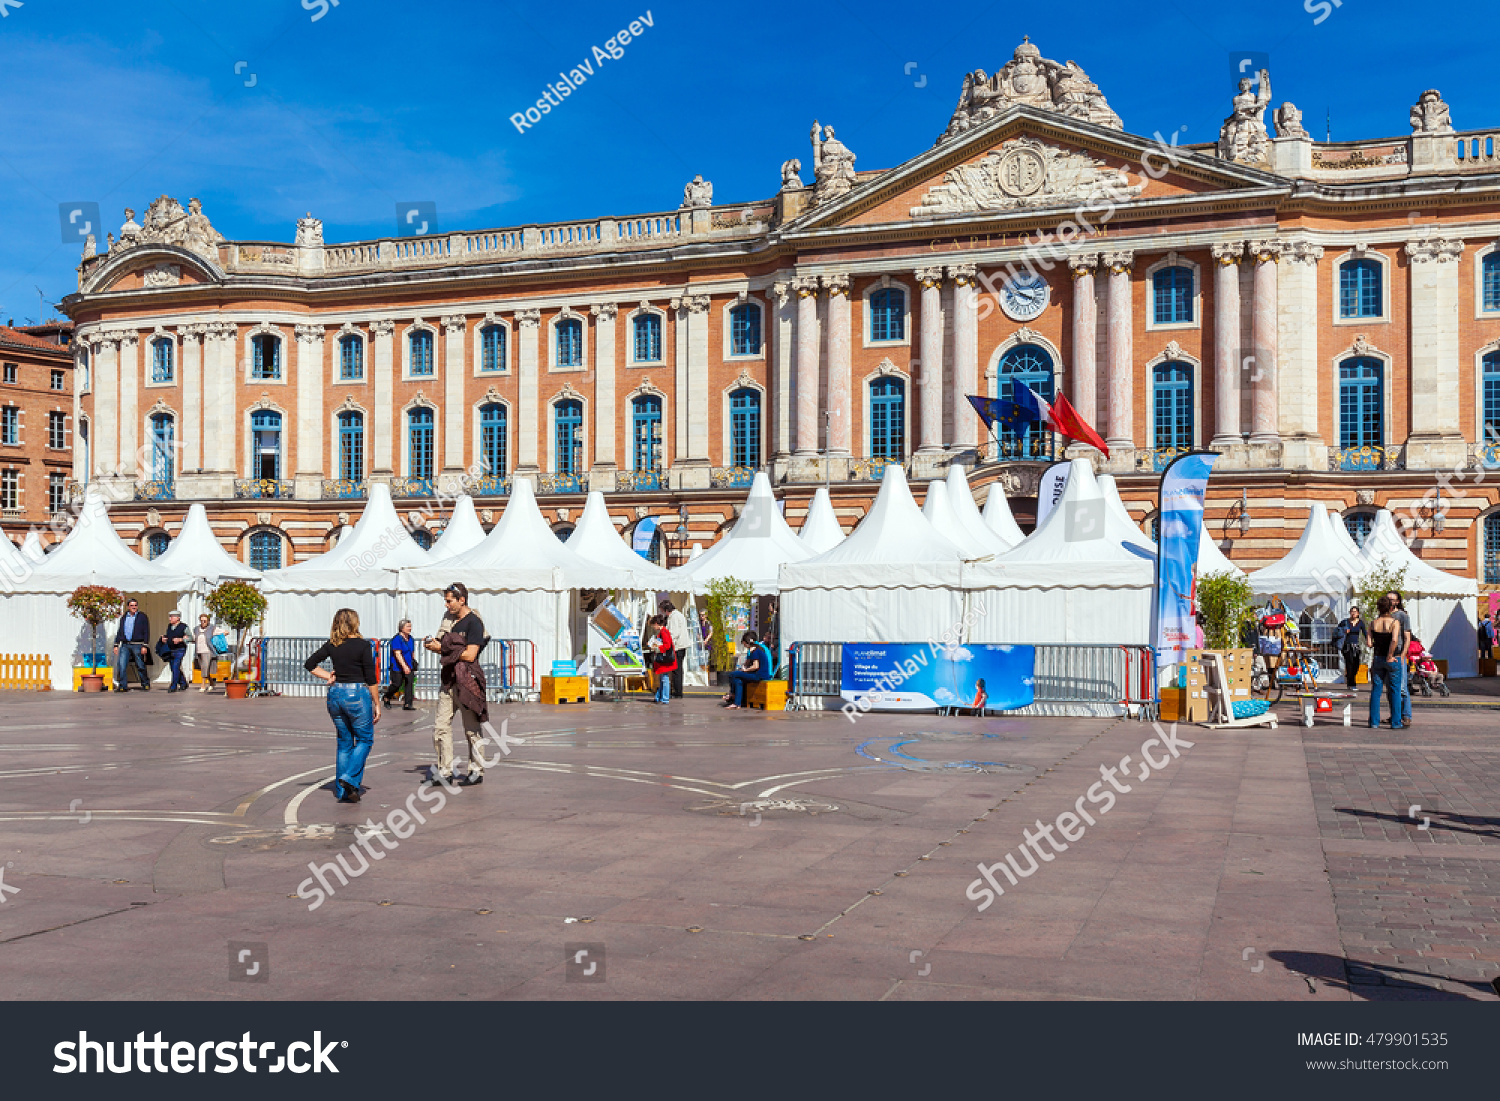 Toulouse France April 1 2011 French Stock Photo 479901535 - Shutterstock